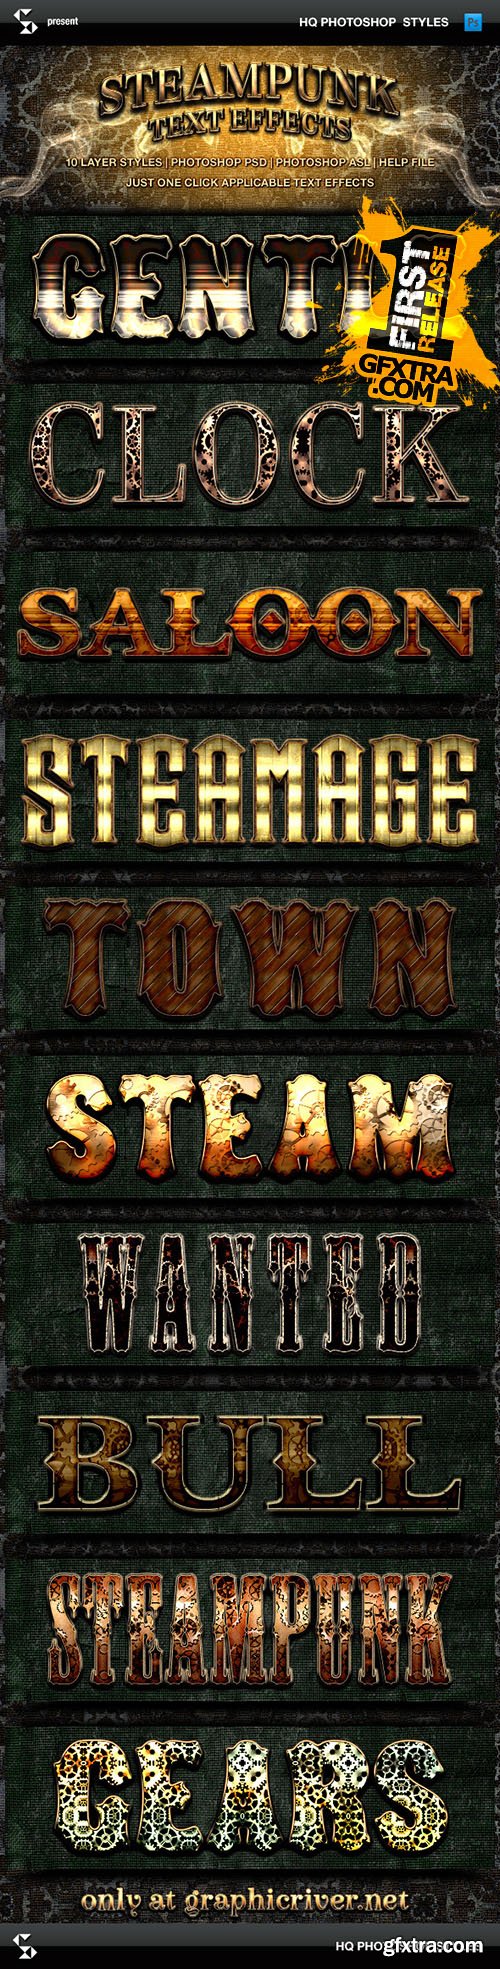 GraphicRiver - Steampunk Text Effects